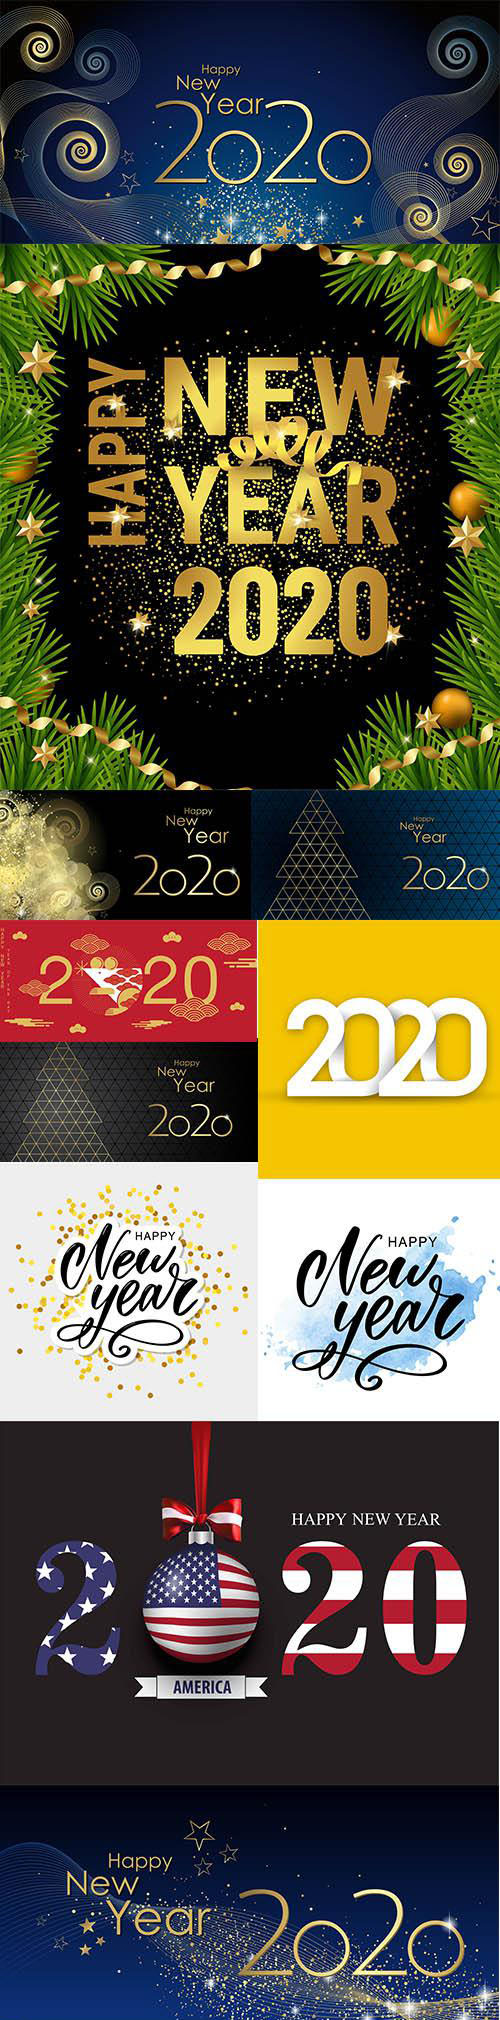 Merry Christmas and Happy New Year 2020 Illustrations Vector Set 4